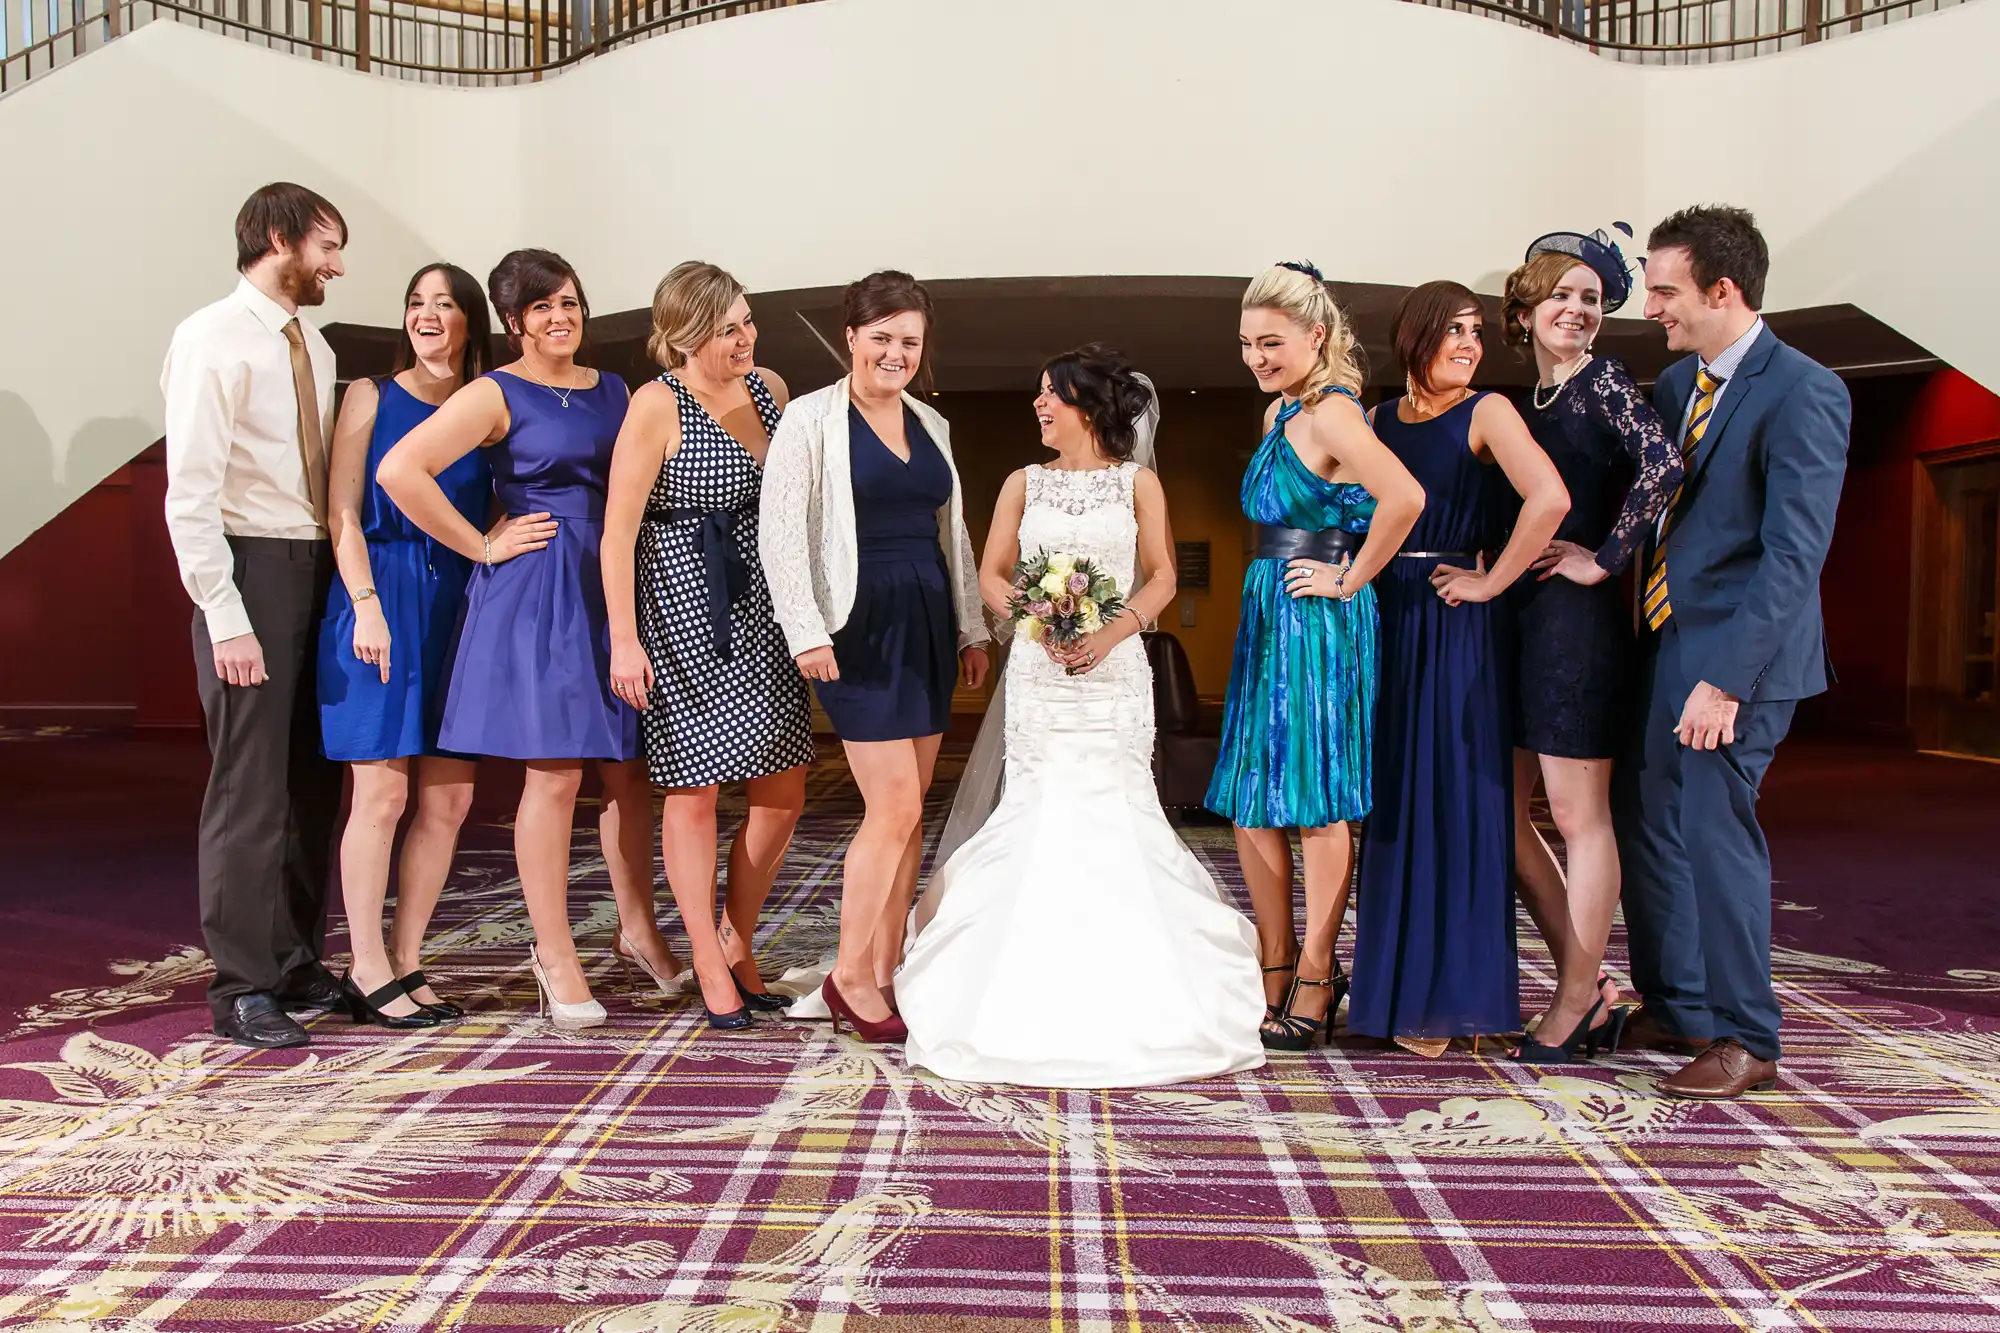 A bride in a white gown and groom in a navy suit with a group of guests in semi-formal attire, smiling and posing in an indoor setting.